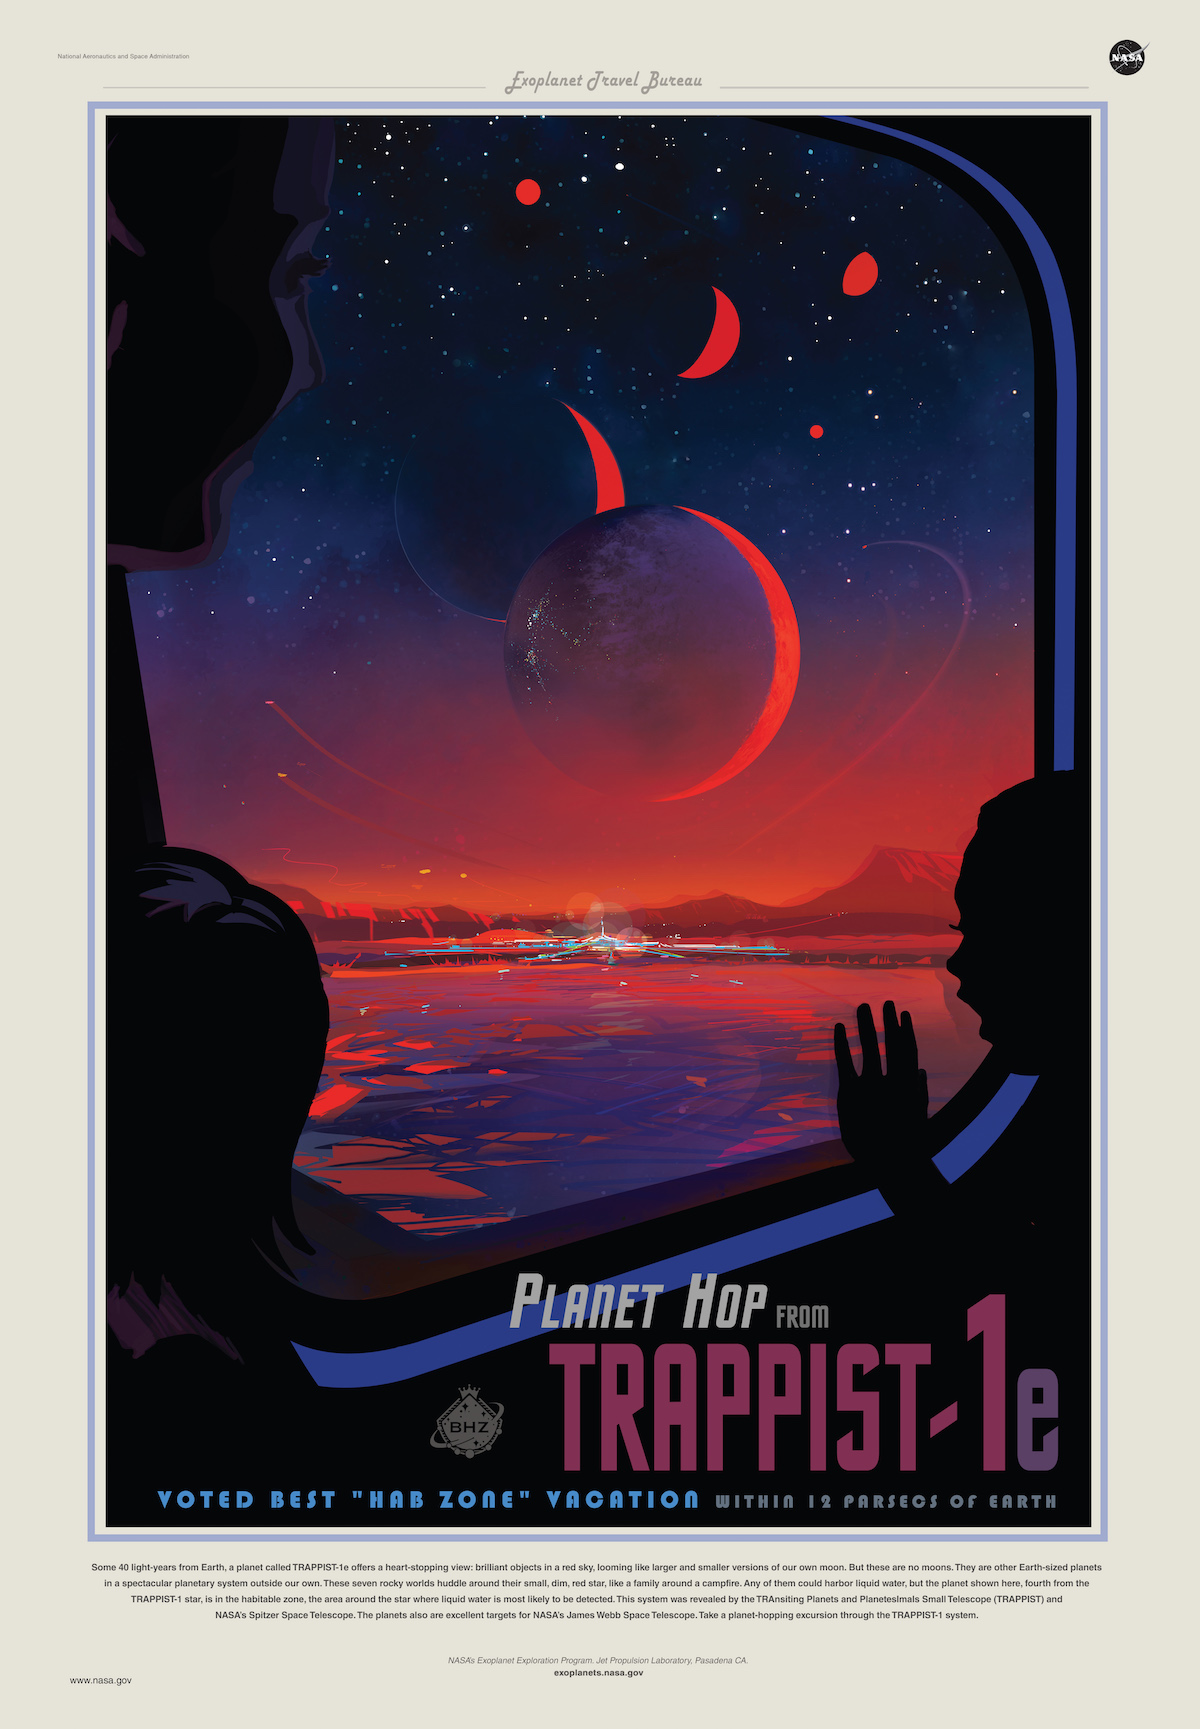 NASA Is Turning TRAPPIST-1 Into Science Nerd Fanfic